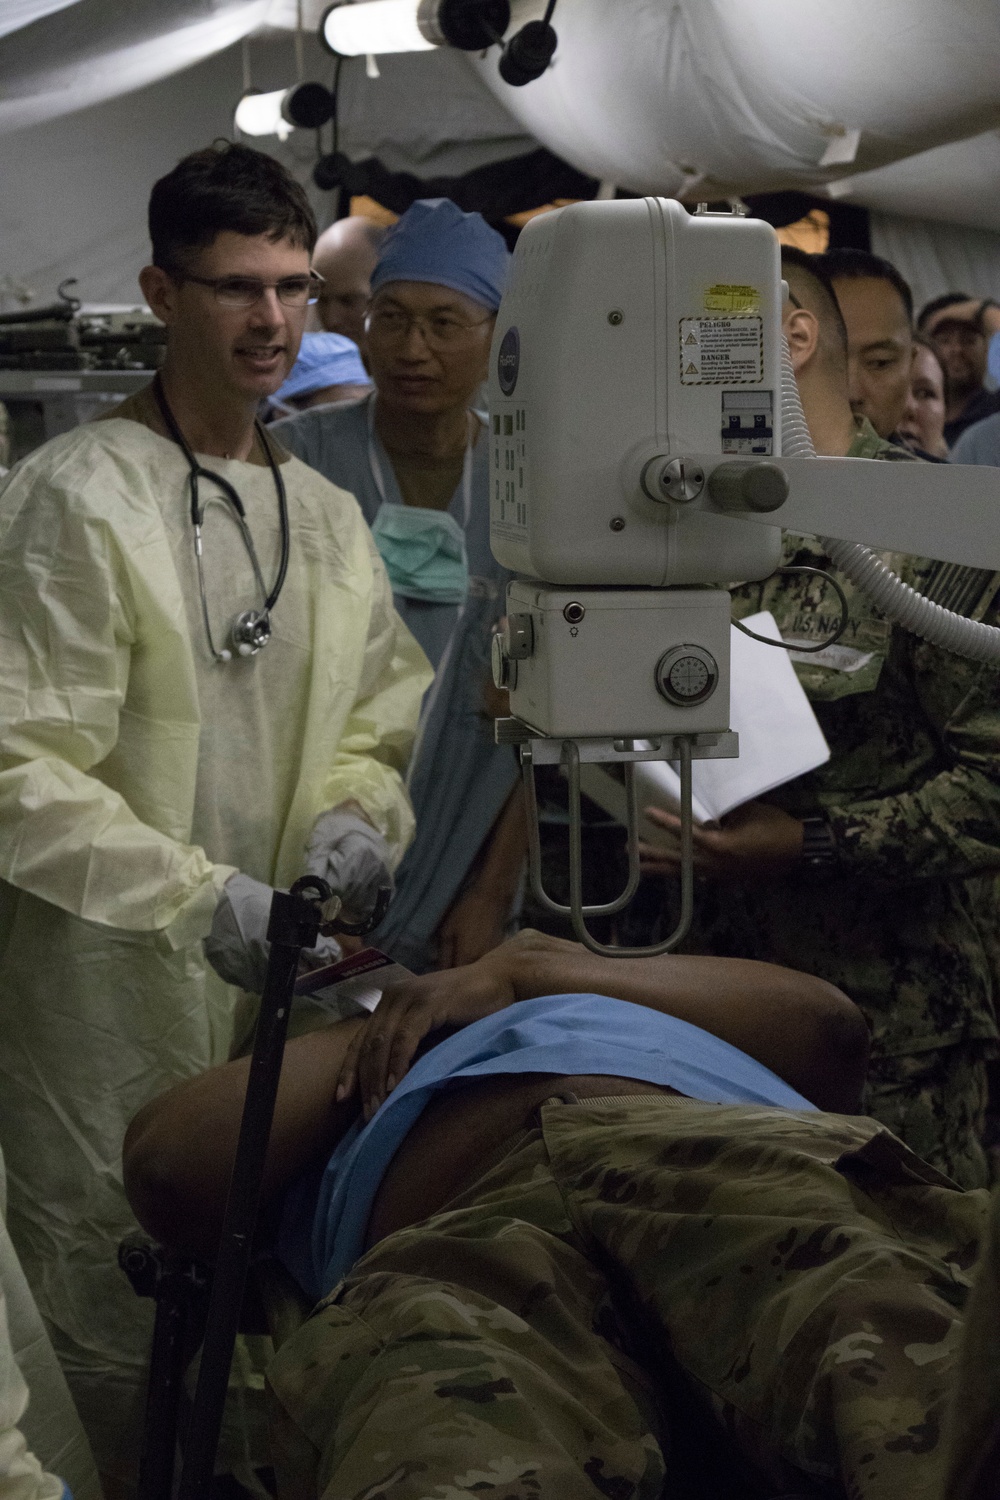 Army and Navy Reserve and National Guard train to save lives